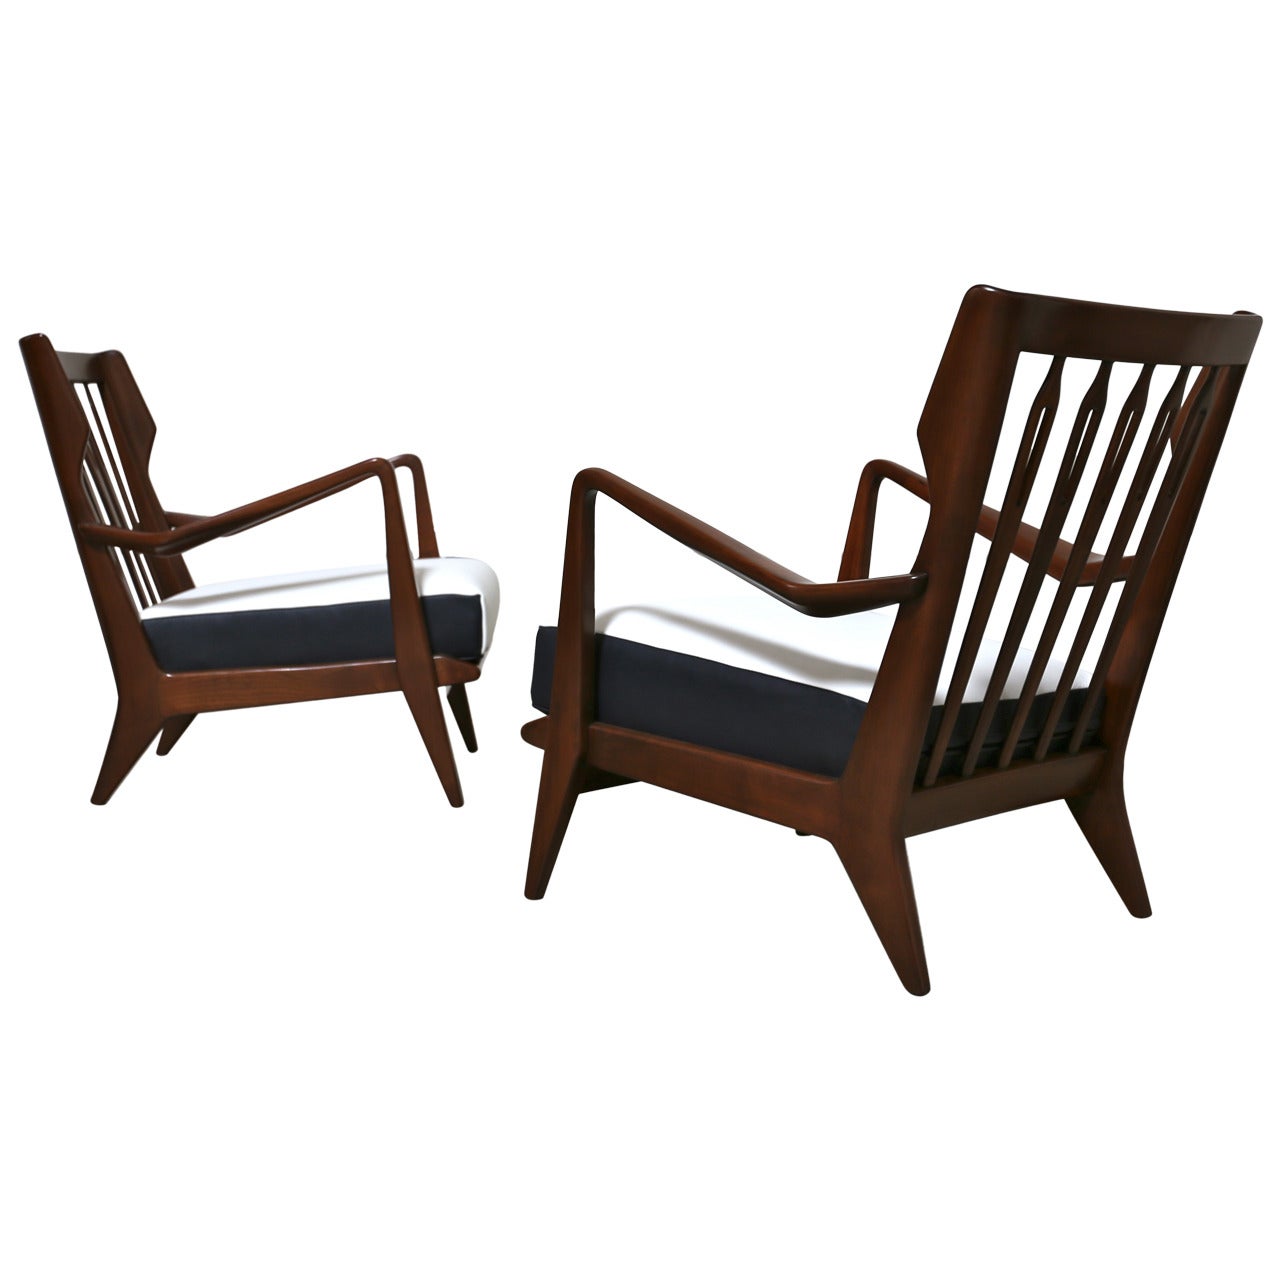 Pair of Lounge Chairs by Gio Ponti Model No. 516, circa 1955